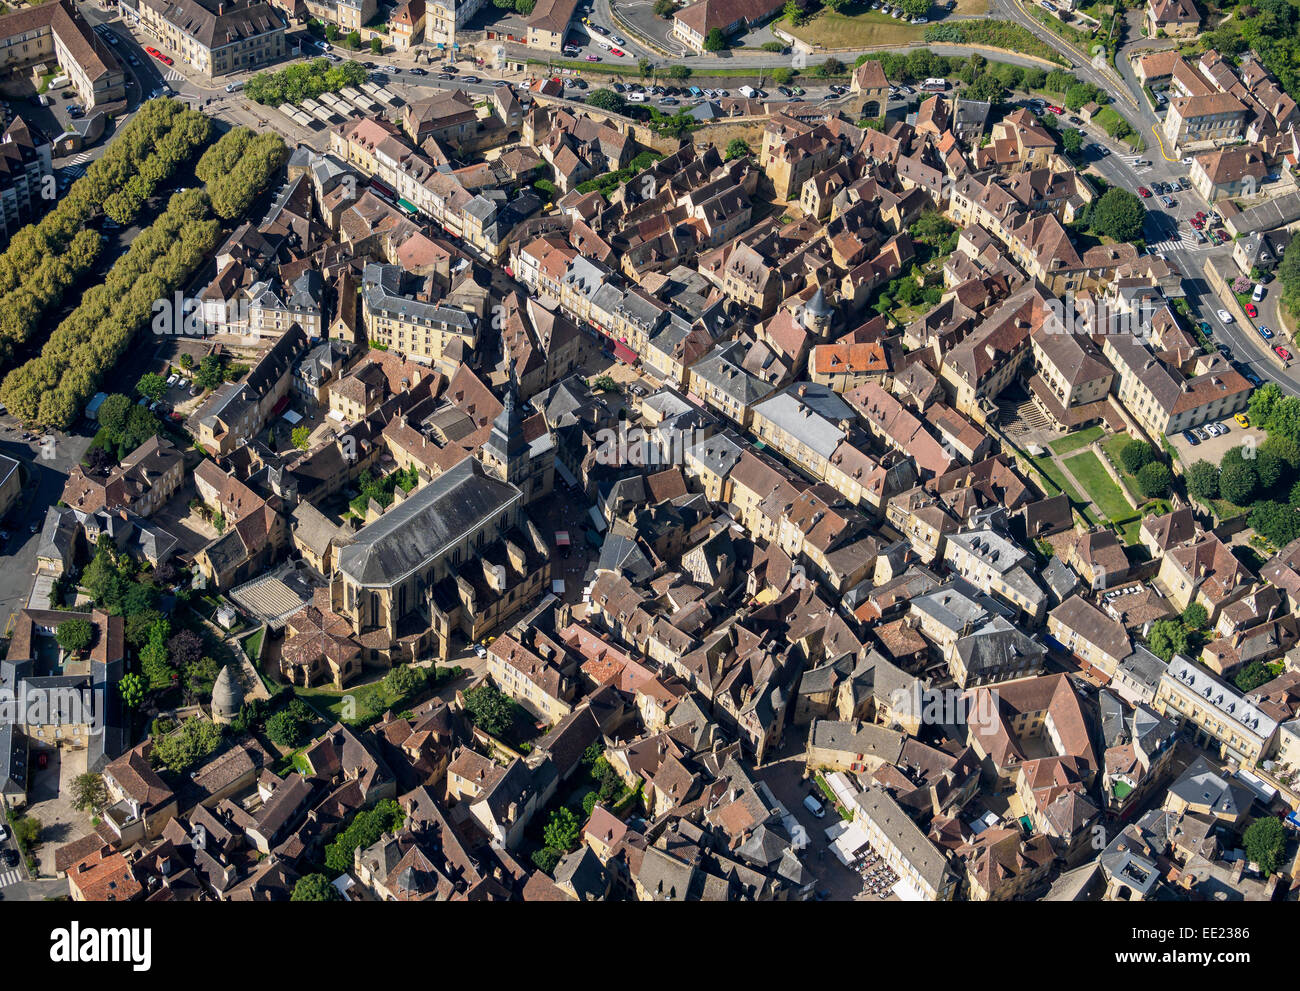 Aerial view: The medieval old town of Sarlat in the Périgord region in southern France. Stock Photo